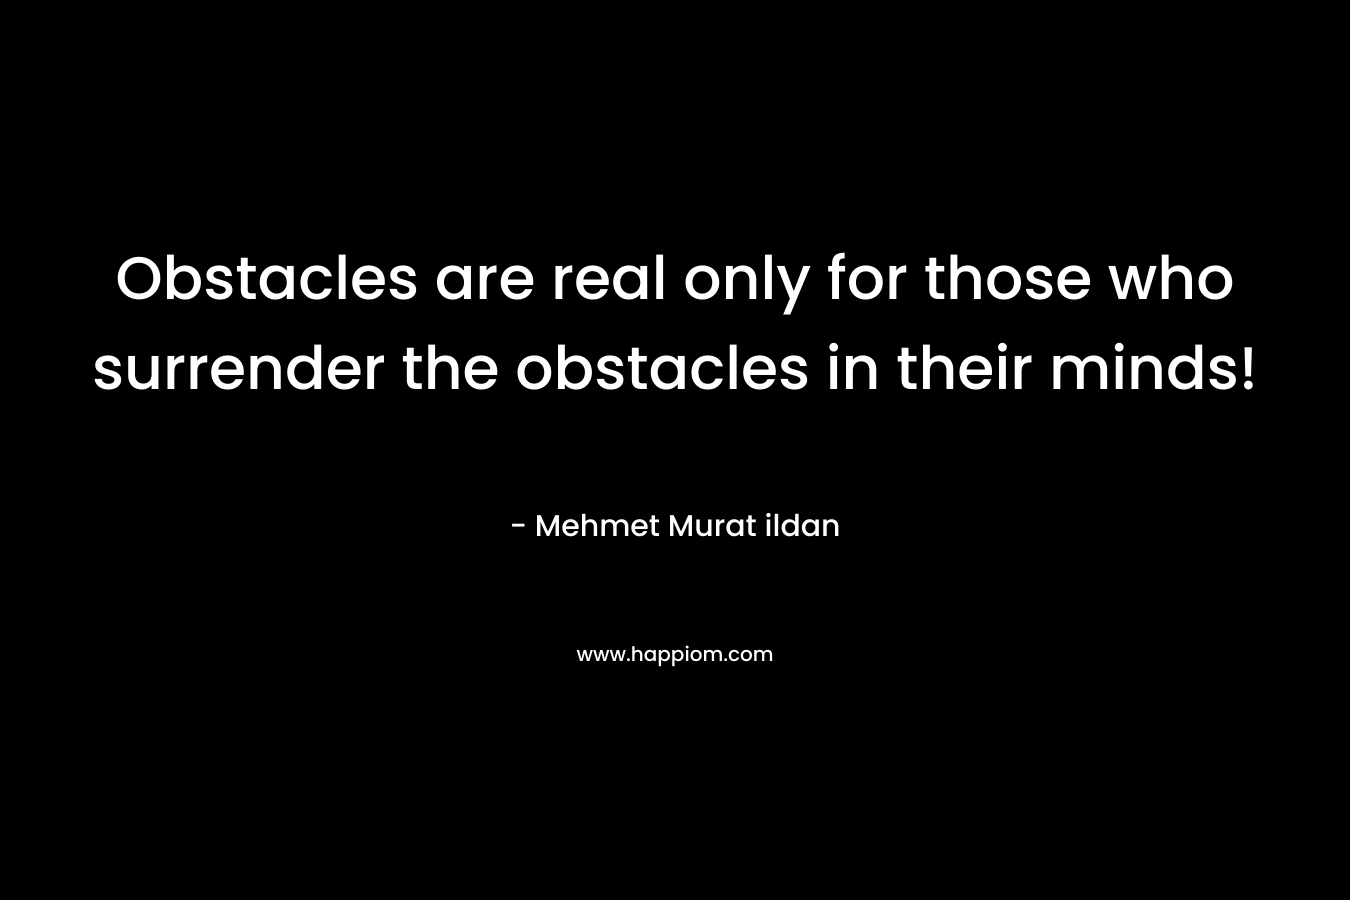 Obstacles are real only for those who surrender the obstacles in their minds! – Mehmet Murat ildan